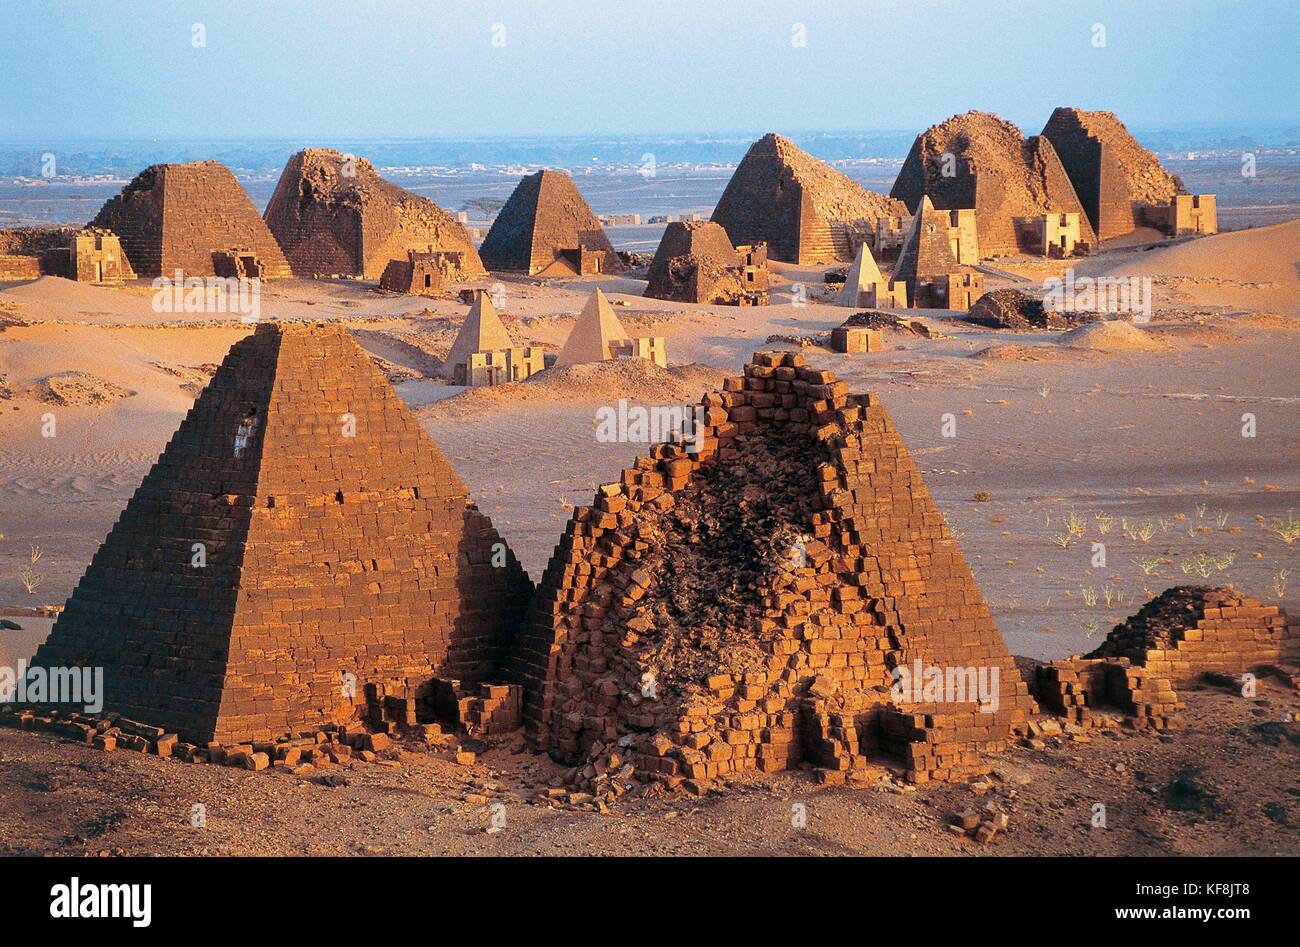 funeral-pyramids-and-temples-from-the-kingdom-of-kush-800-bc-350-ad-KF8JT8.jpg